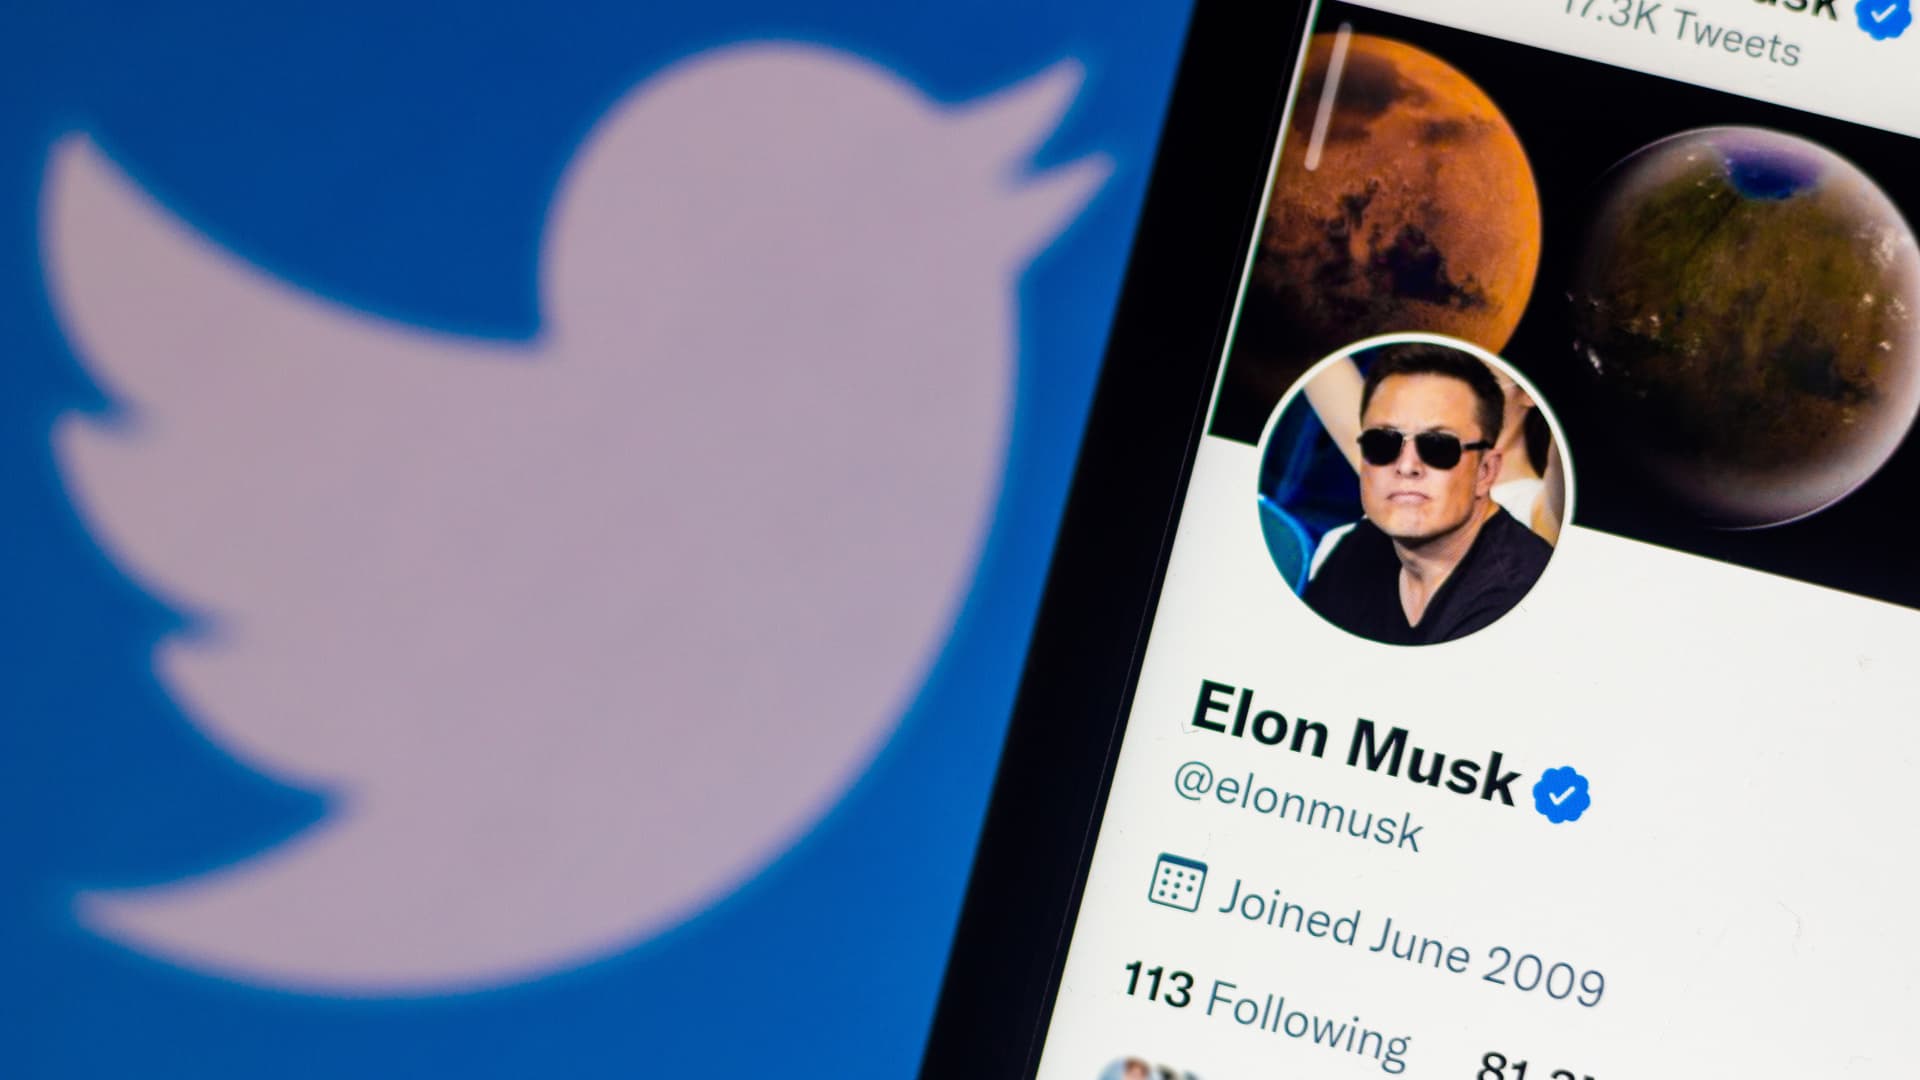 Twitter misses earnings expectations, partially blames revenue drop on Elon Musk takeover bid